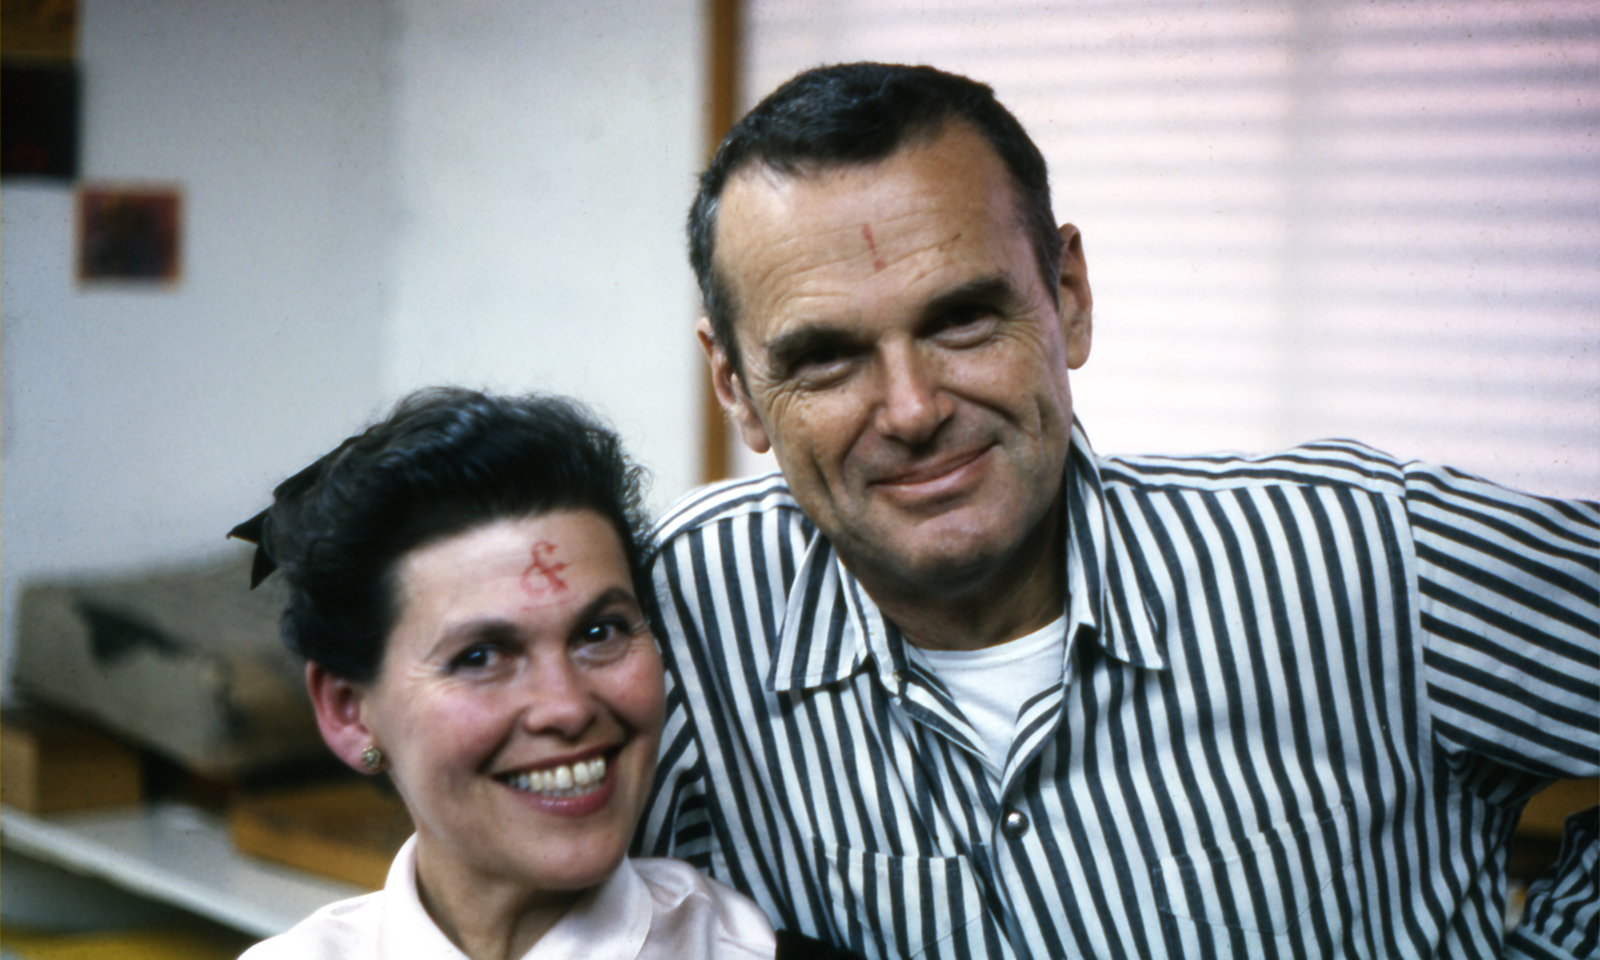 Design & Play: The Story of Charles and Ray Eames